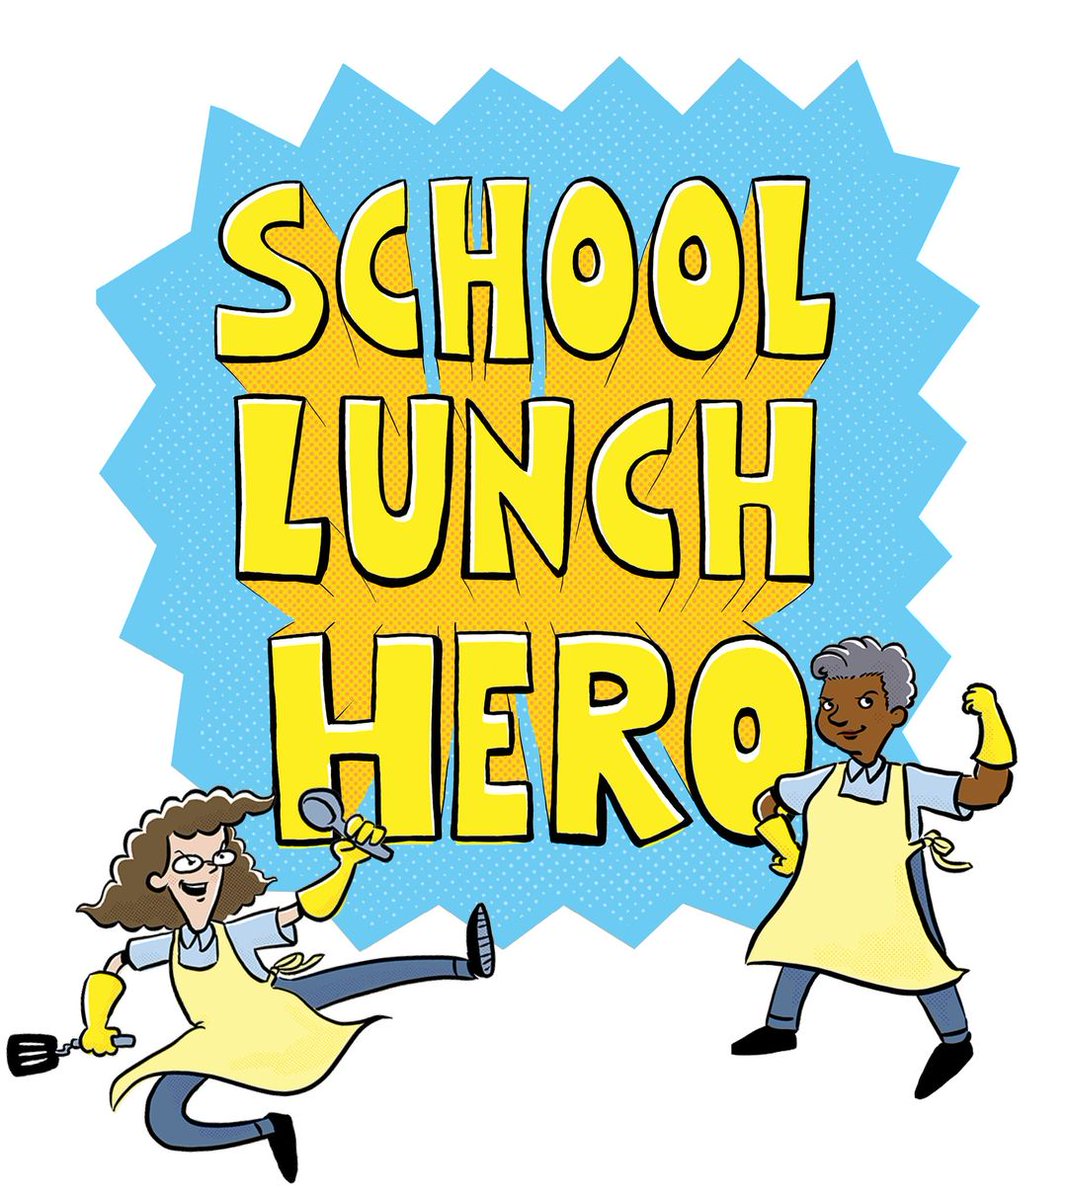 Today, we're celebrating the MVPs of the lunchroom - our amazing school lunch heroes! It's #SchoolLunchHeroDay, and we couldn't be more grateful for the incredible work they do every single day. THANK YOU!